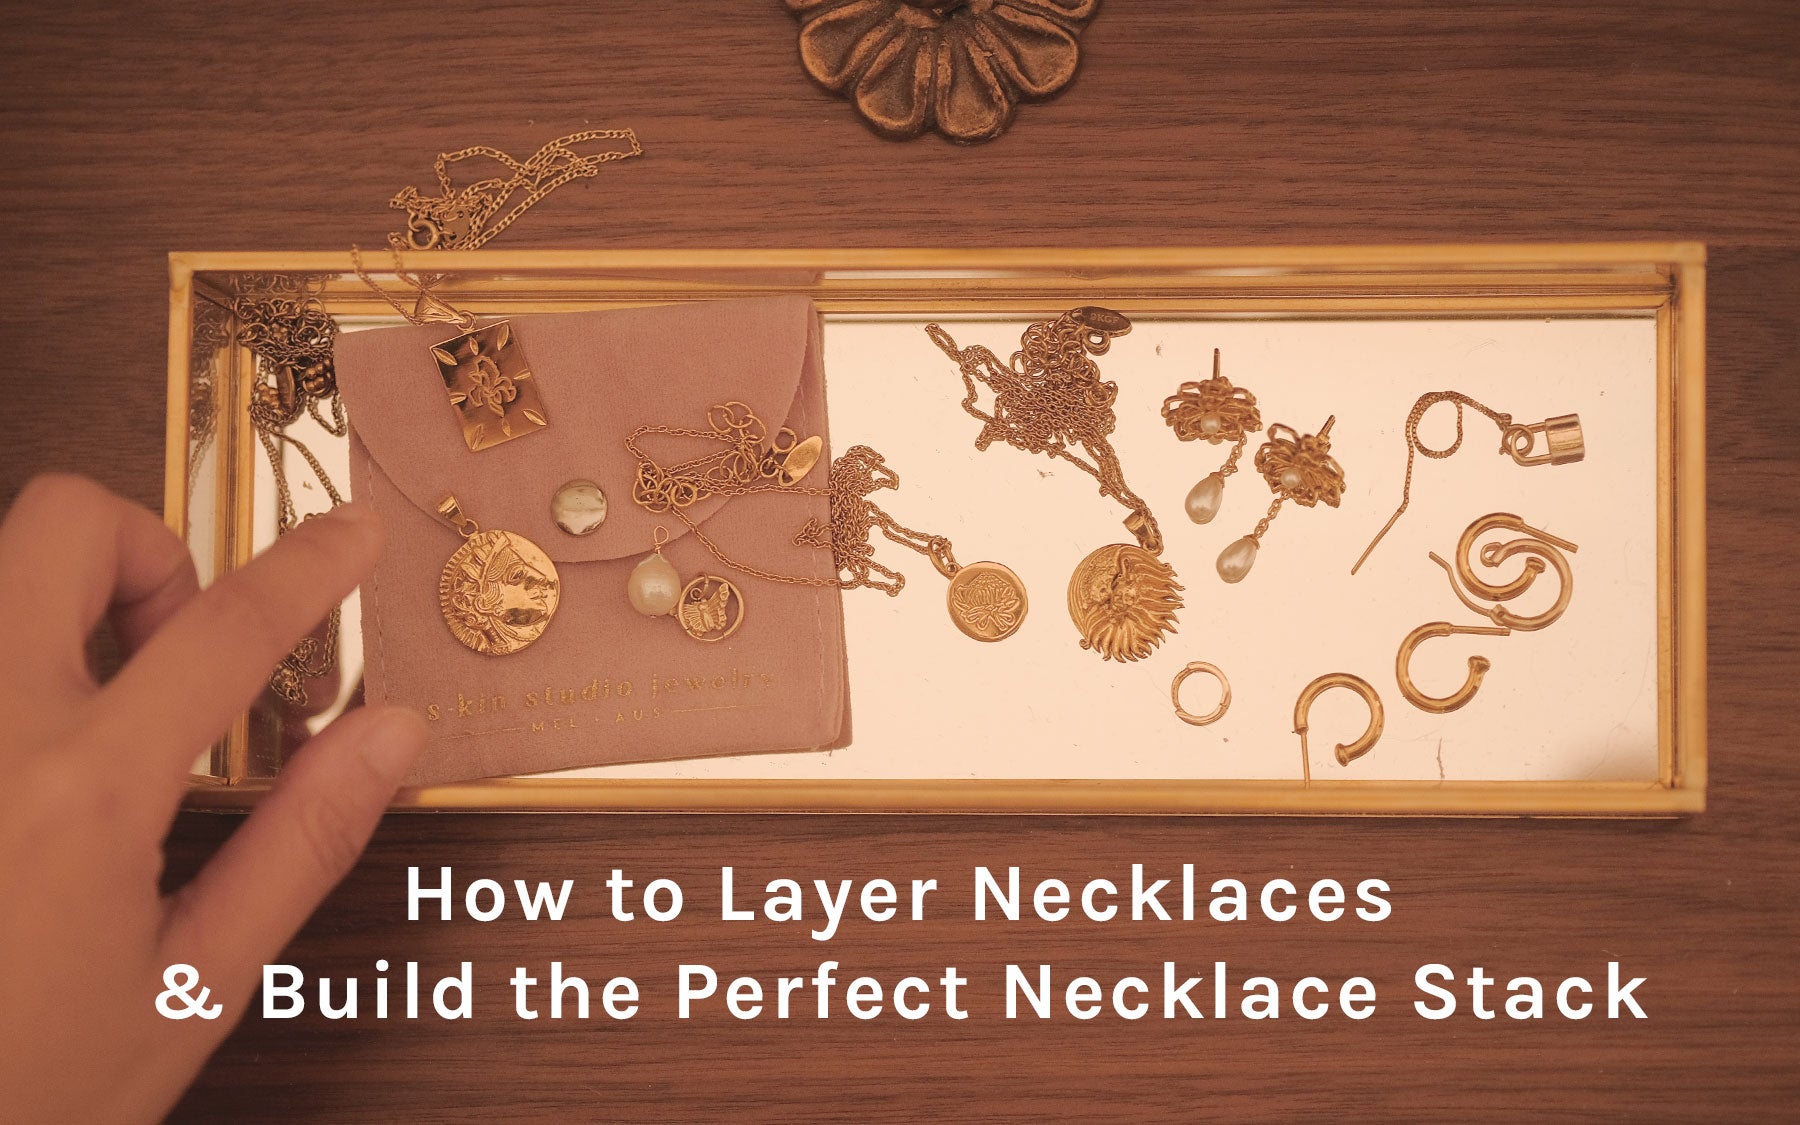 How to Layer Necklaces & Build the Perfect Necklace Stack